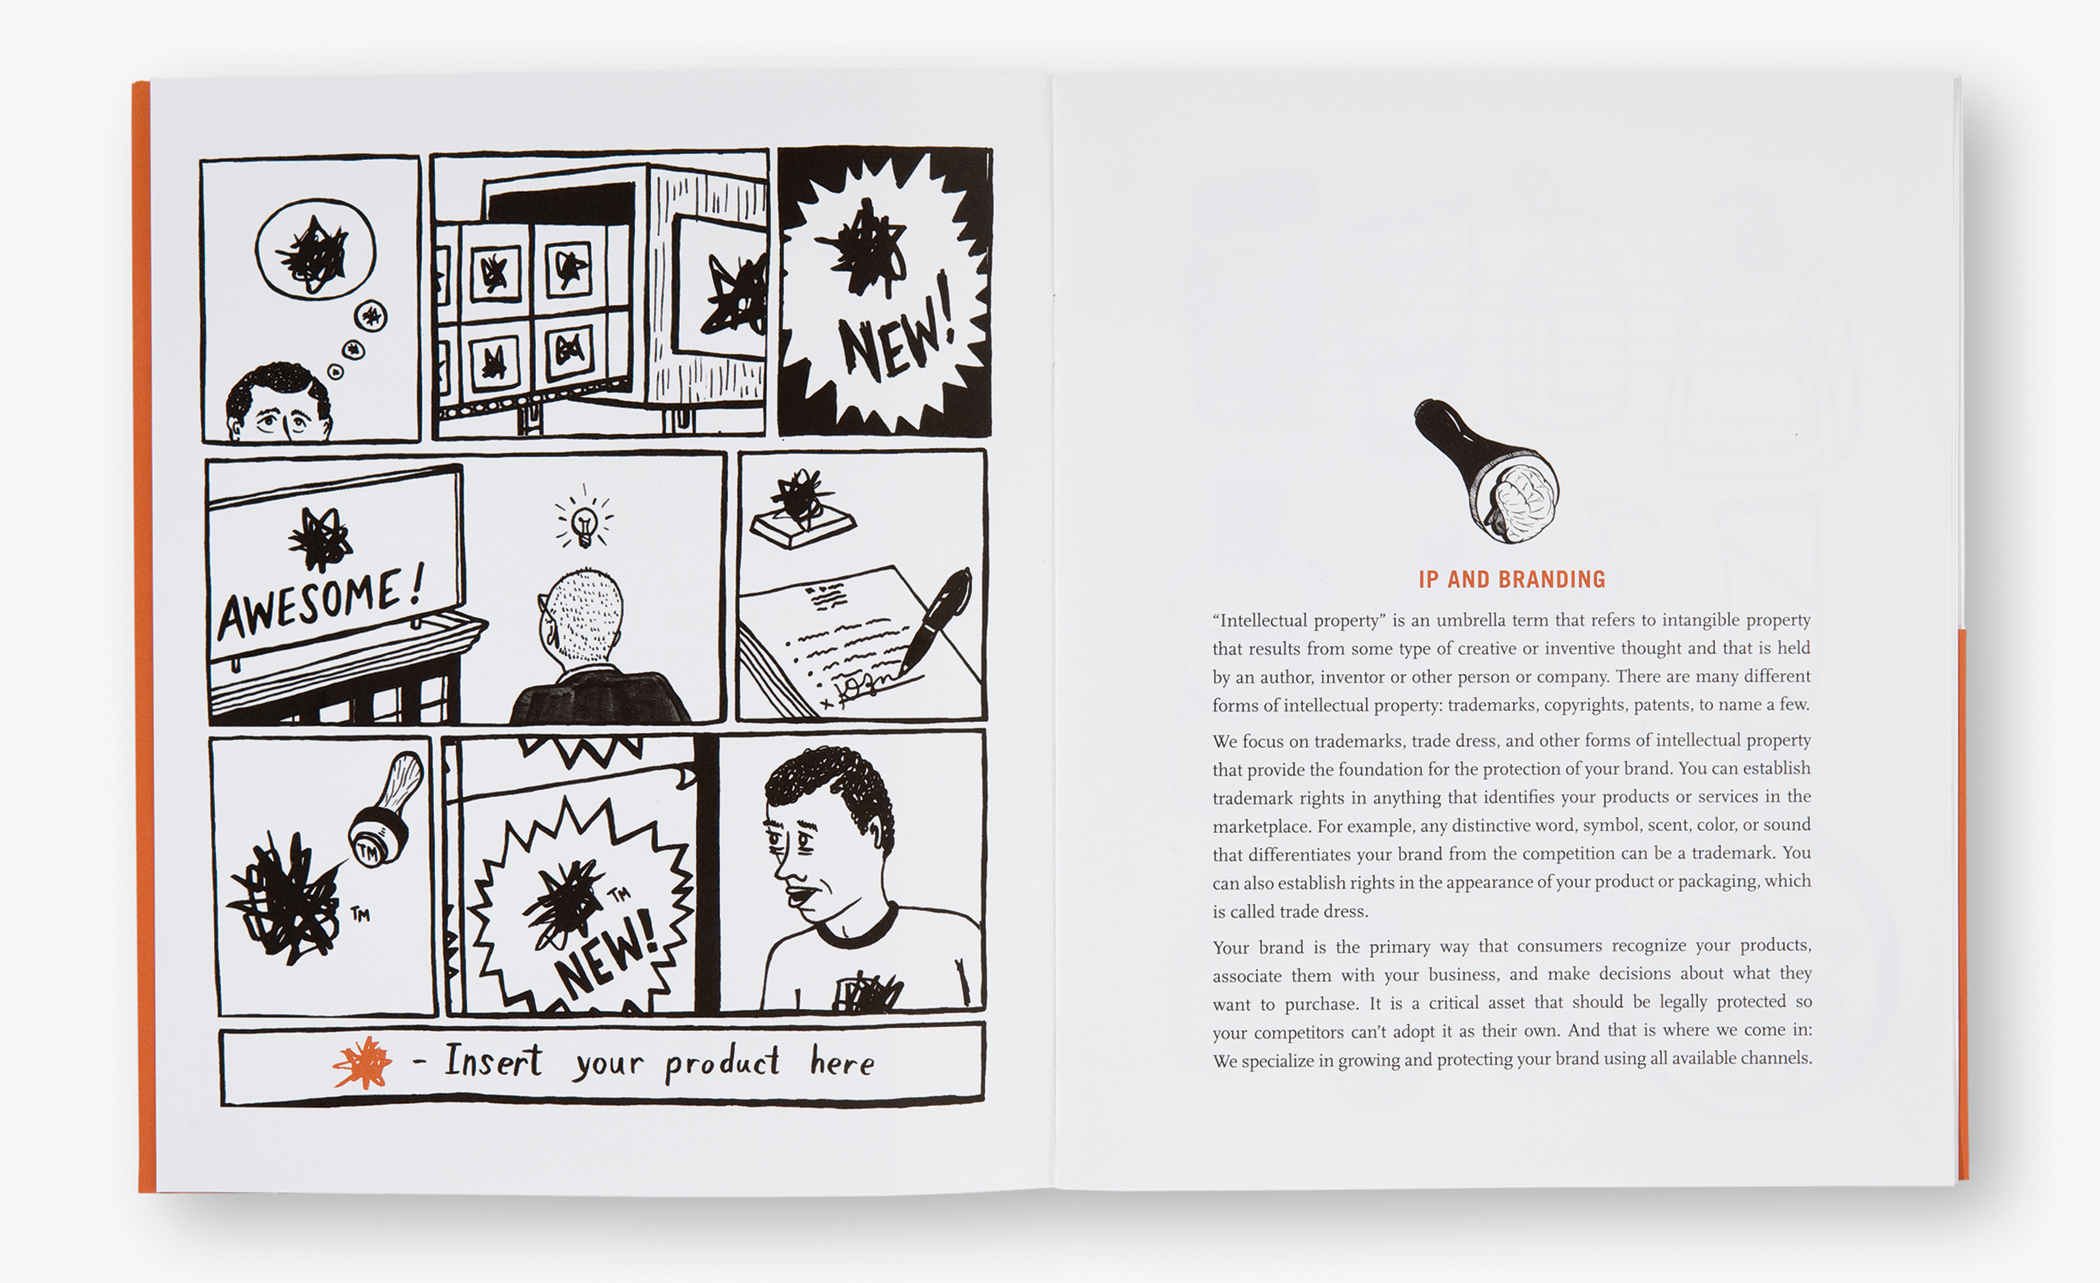 Pages from the Ballard Spahr brochure with comic book-style illustrations and the chapter heading, IP and branding.